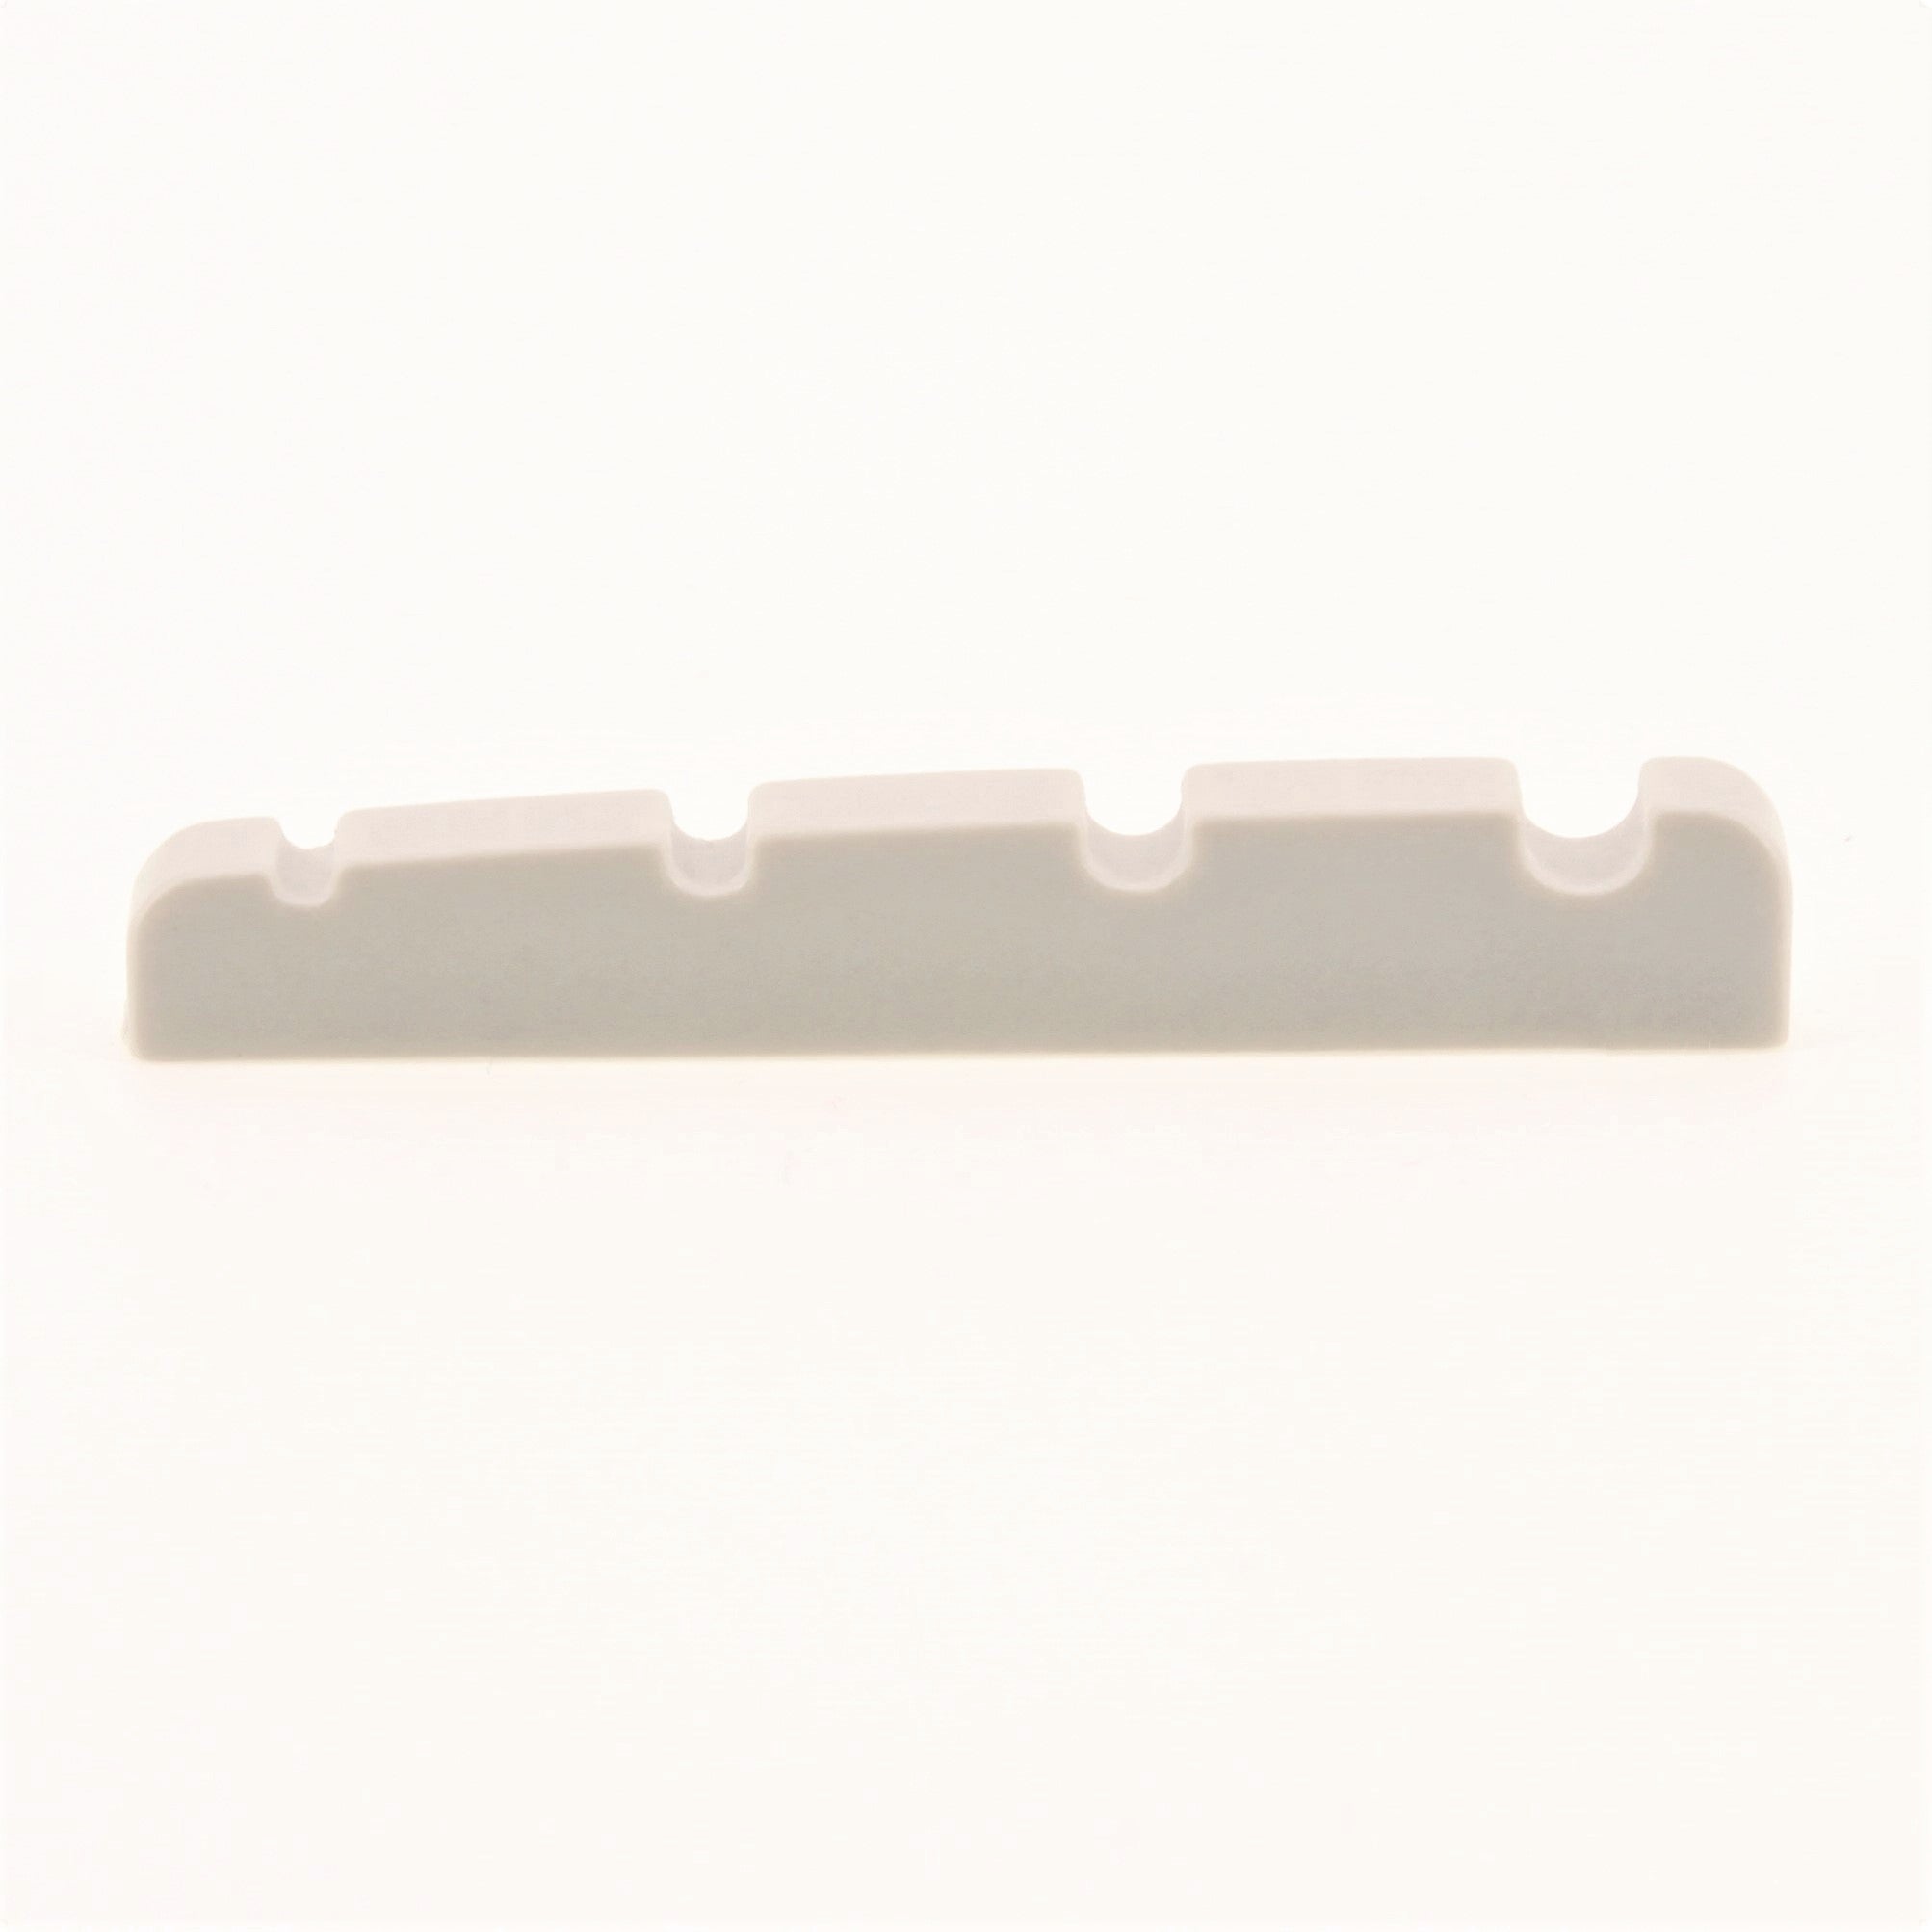 Model 3834-00 Nut Slotted L38.14mm (Select Material)